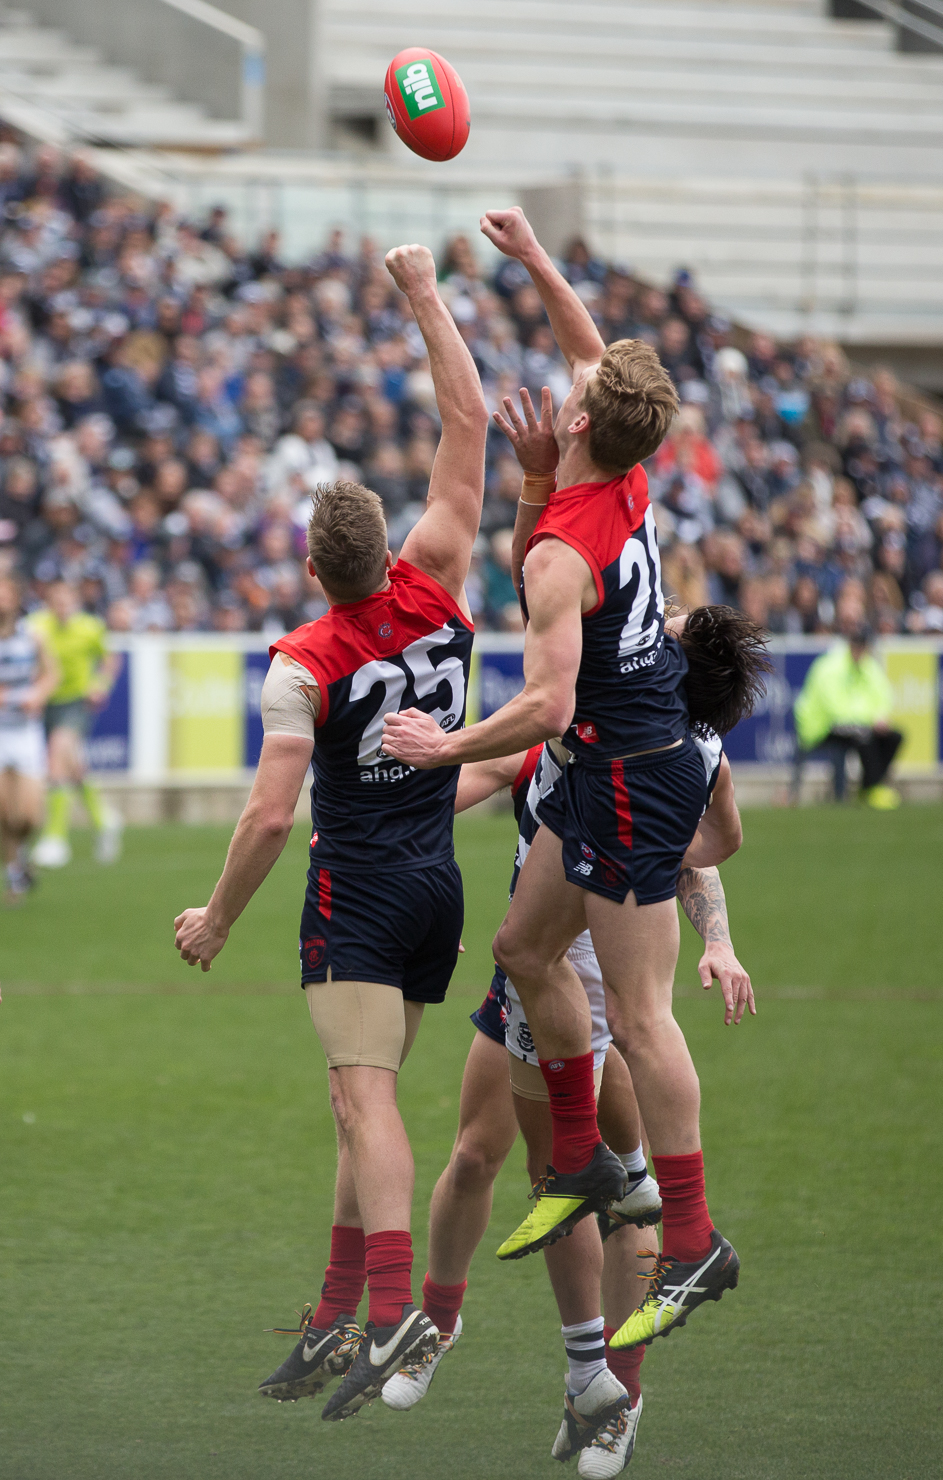 27th August 2016 - Photo a Day - Day 236 - My 2016 Diary - Geelong v Melbourne